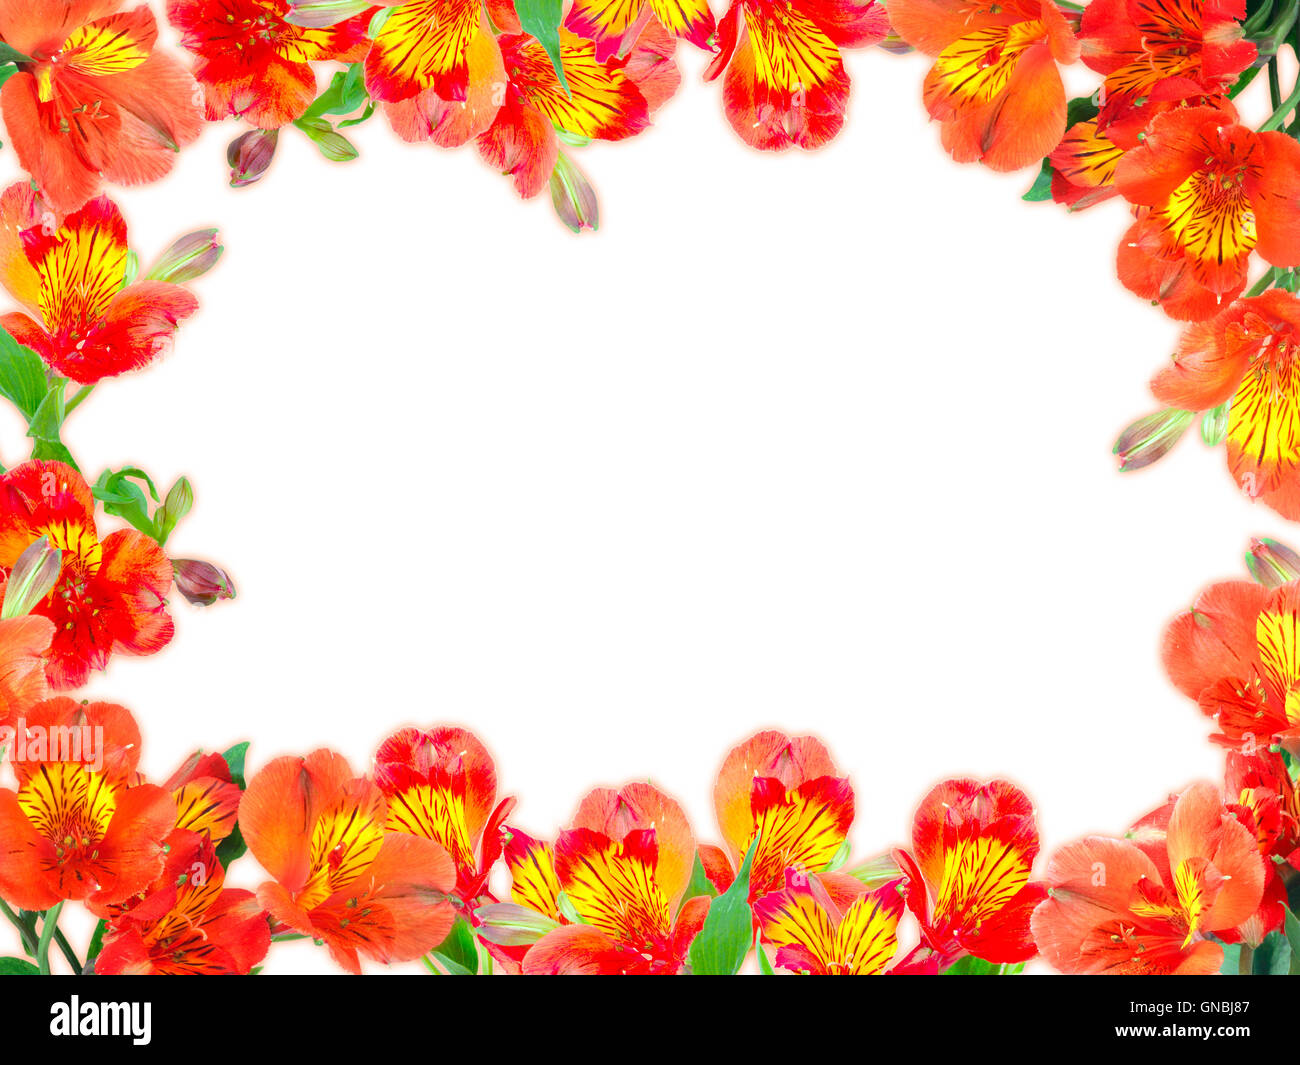 Floral frame with orange flowers and green leaf Stock Photo